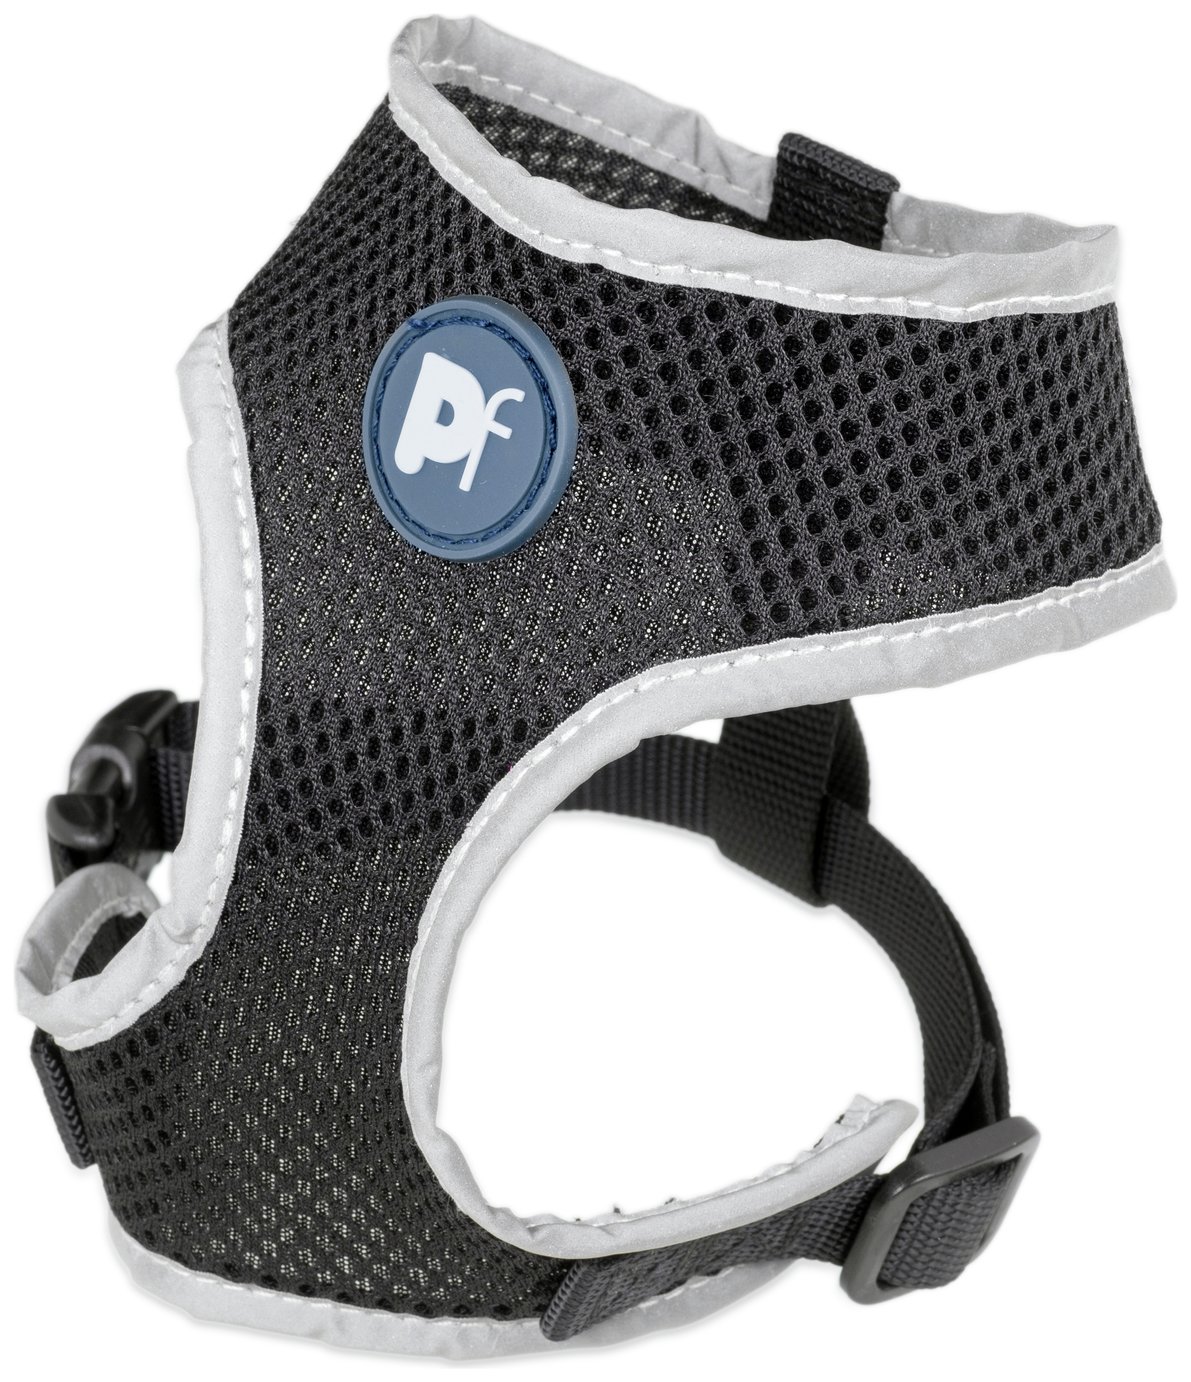 Petface Comfort Dog Harness - Extra Small